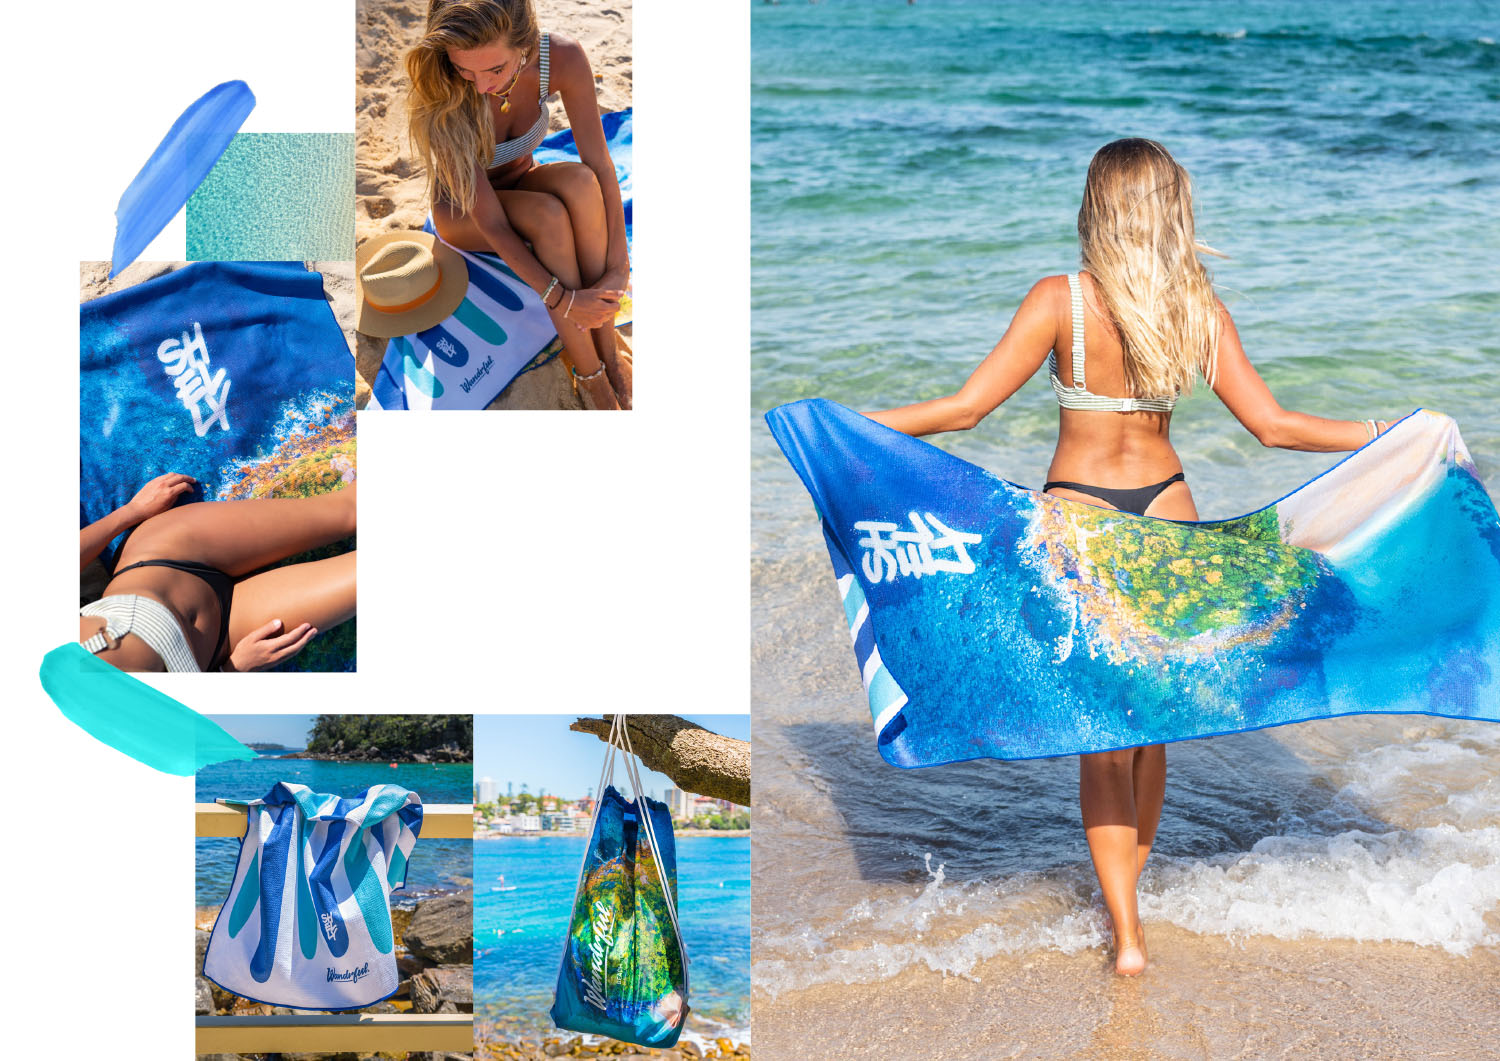 Wandrful sand-free beach towels at Shelly Beach, Manly. Model using sand-free beach towel.